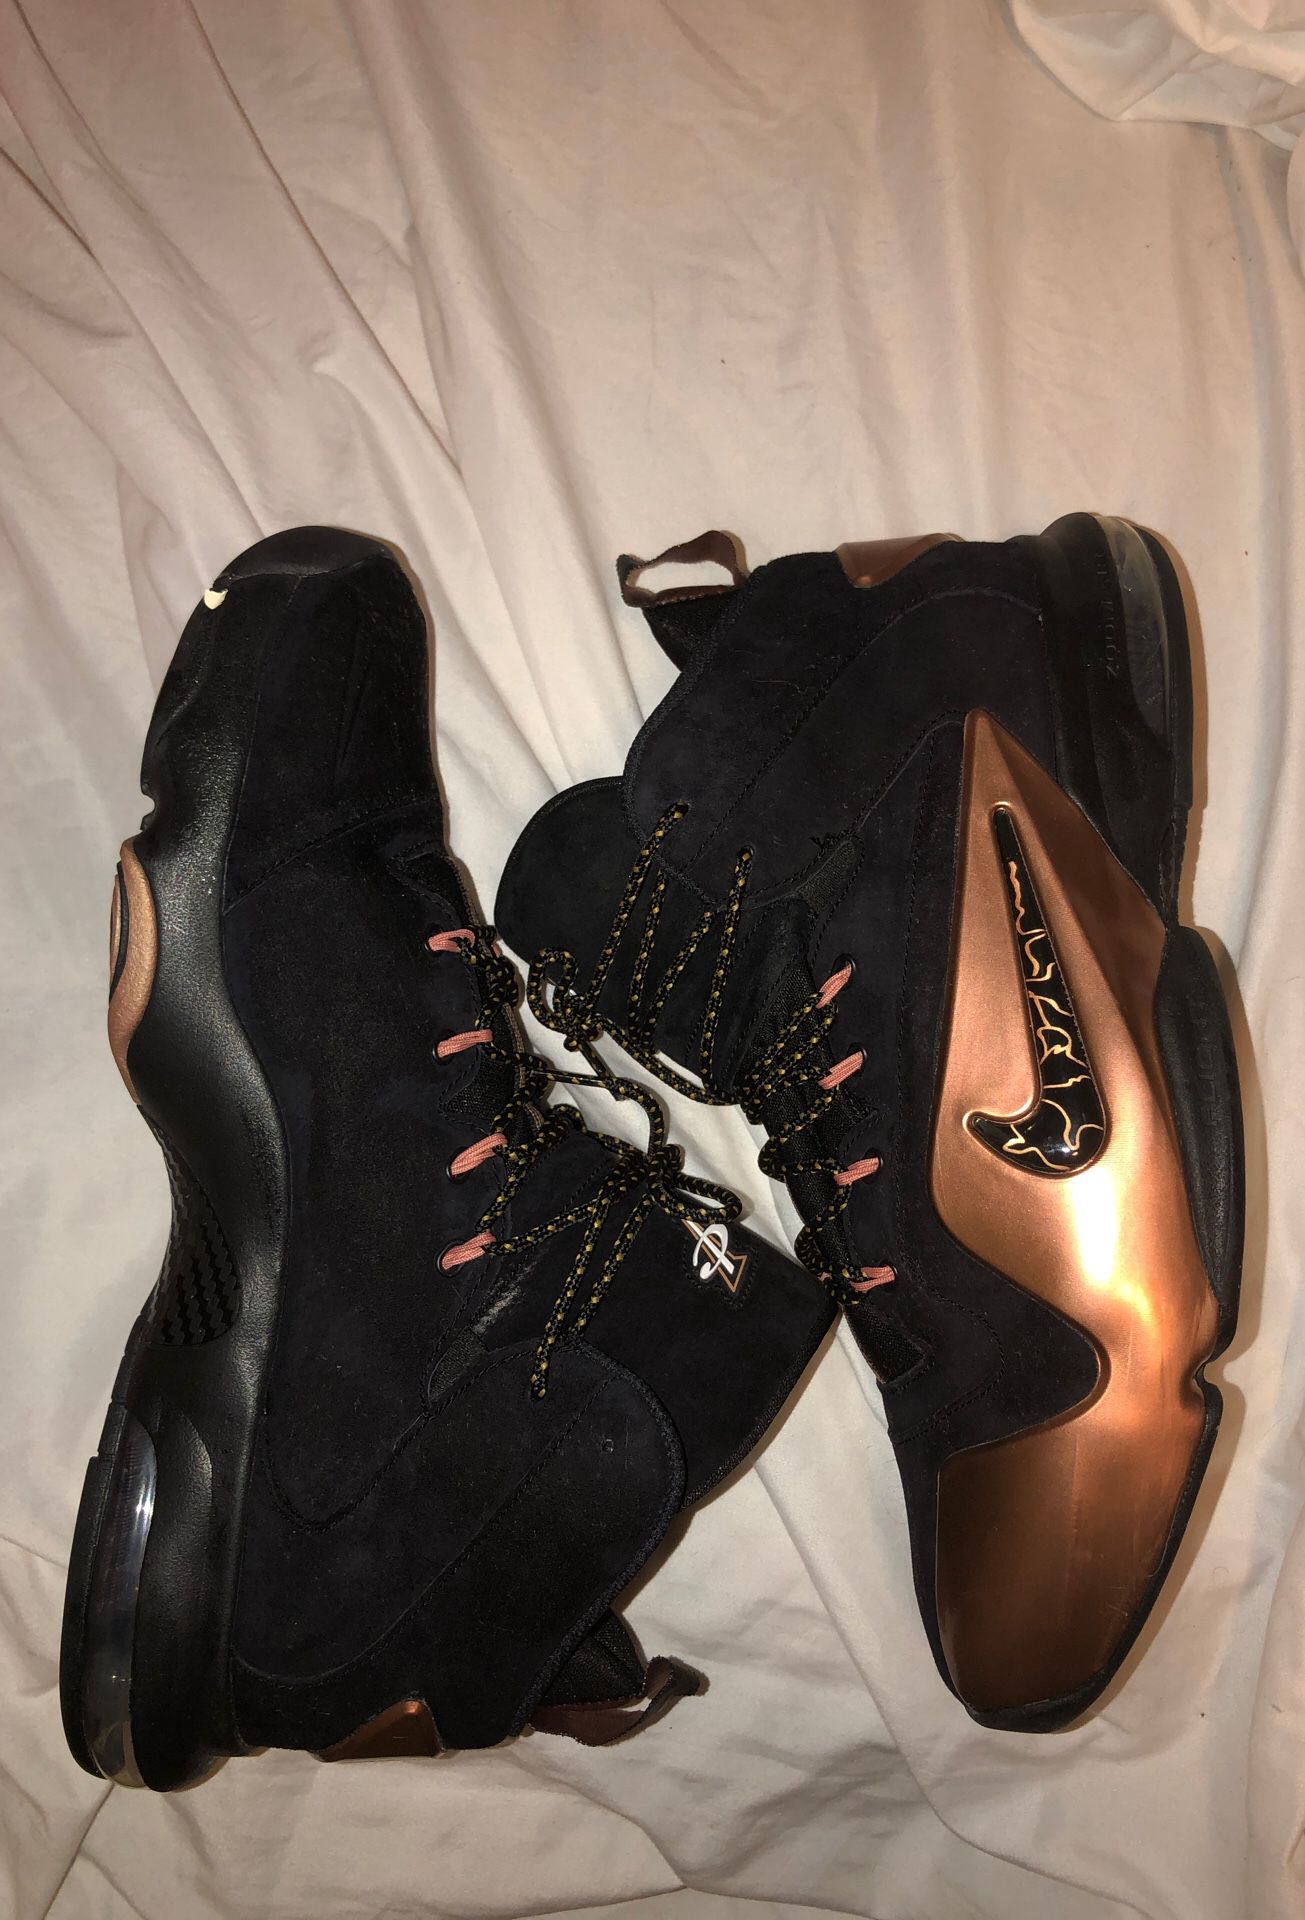 Nike air zoom Penny 6 black copper size 12 men’s basketball shoes